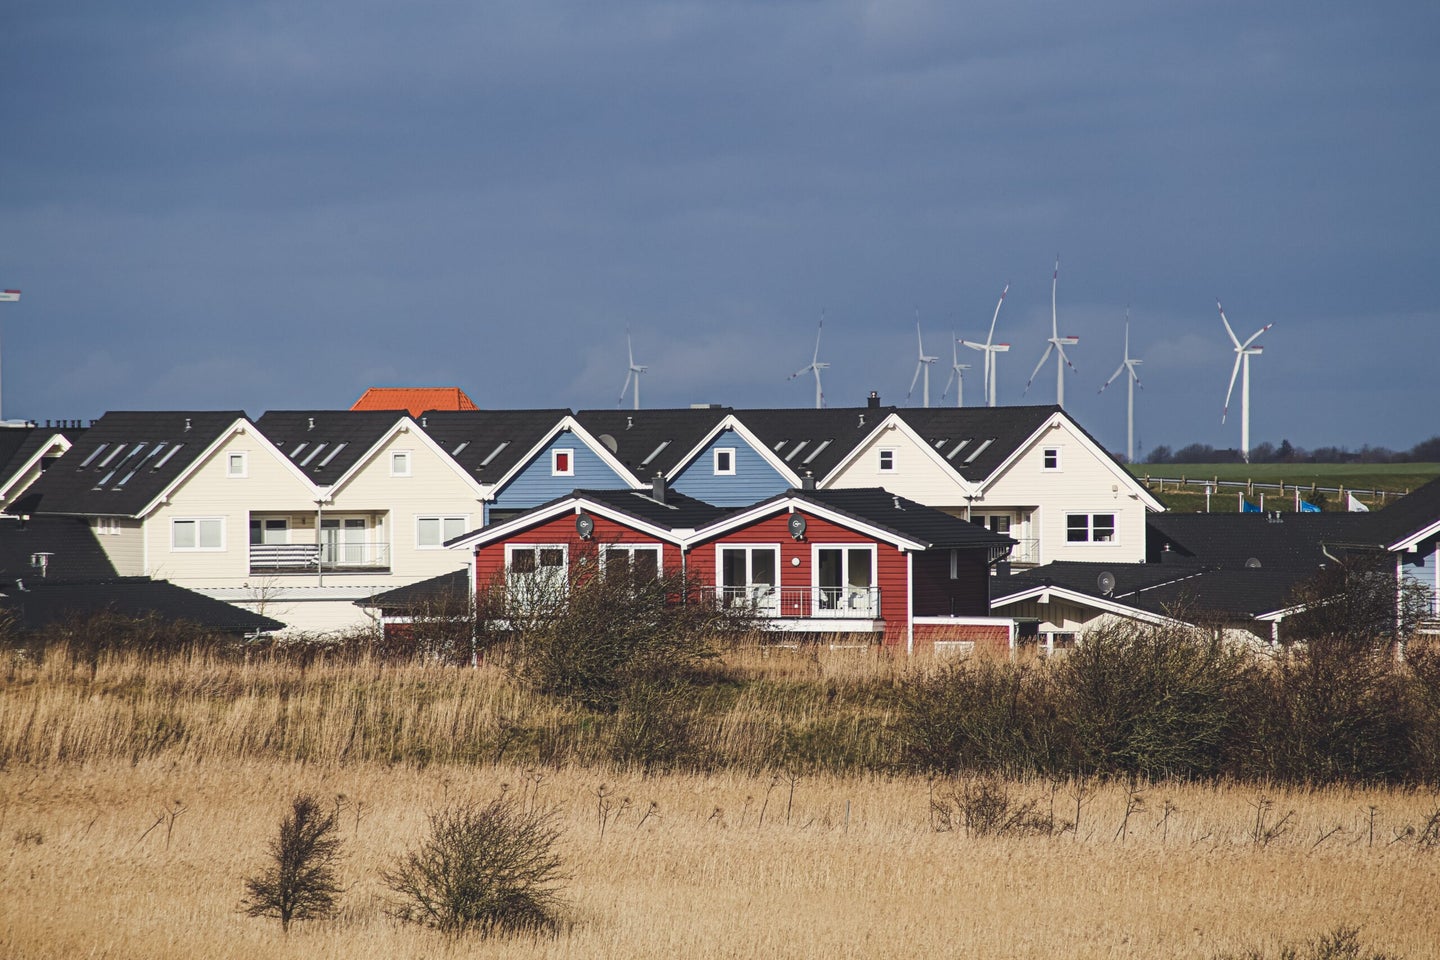 Grass field with homes and wind turbines in the background.